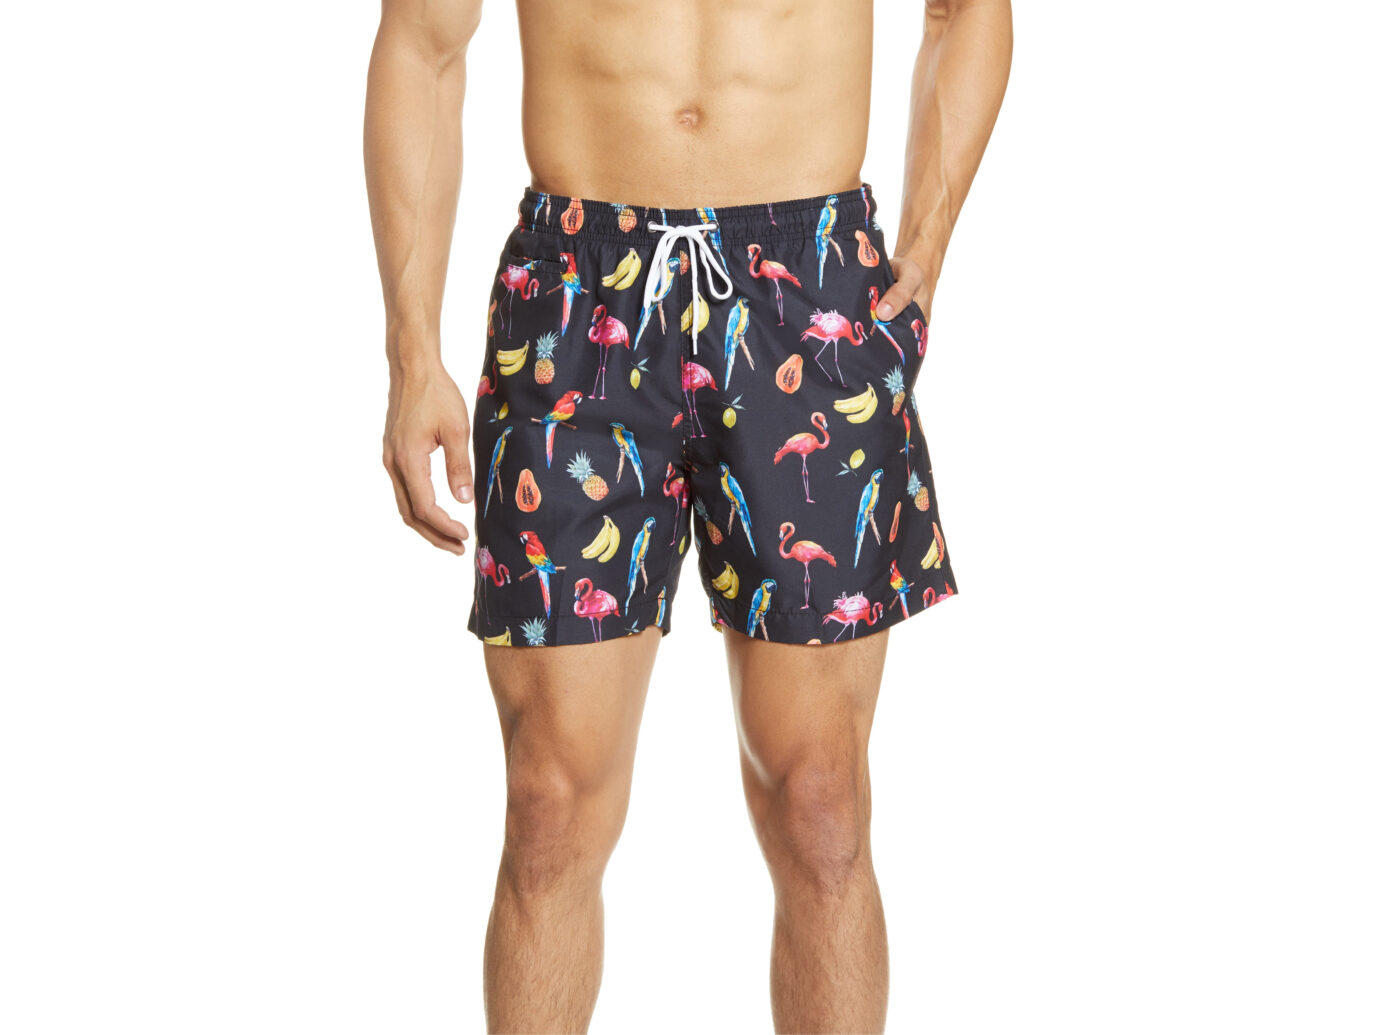 RELLECIGA Men/'s Swim Trunks Quick Dry Board Shorts with Pockets Bathing Suits